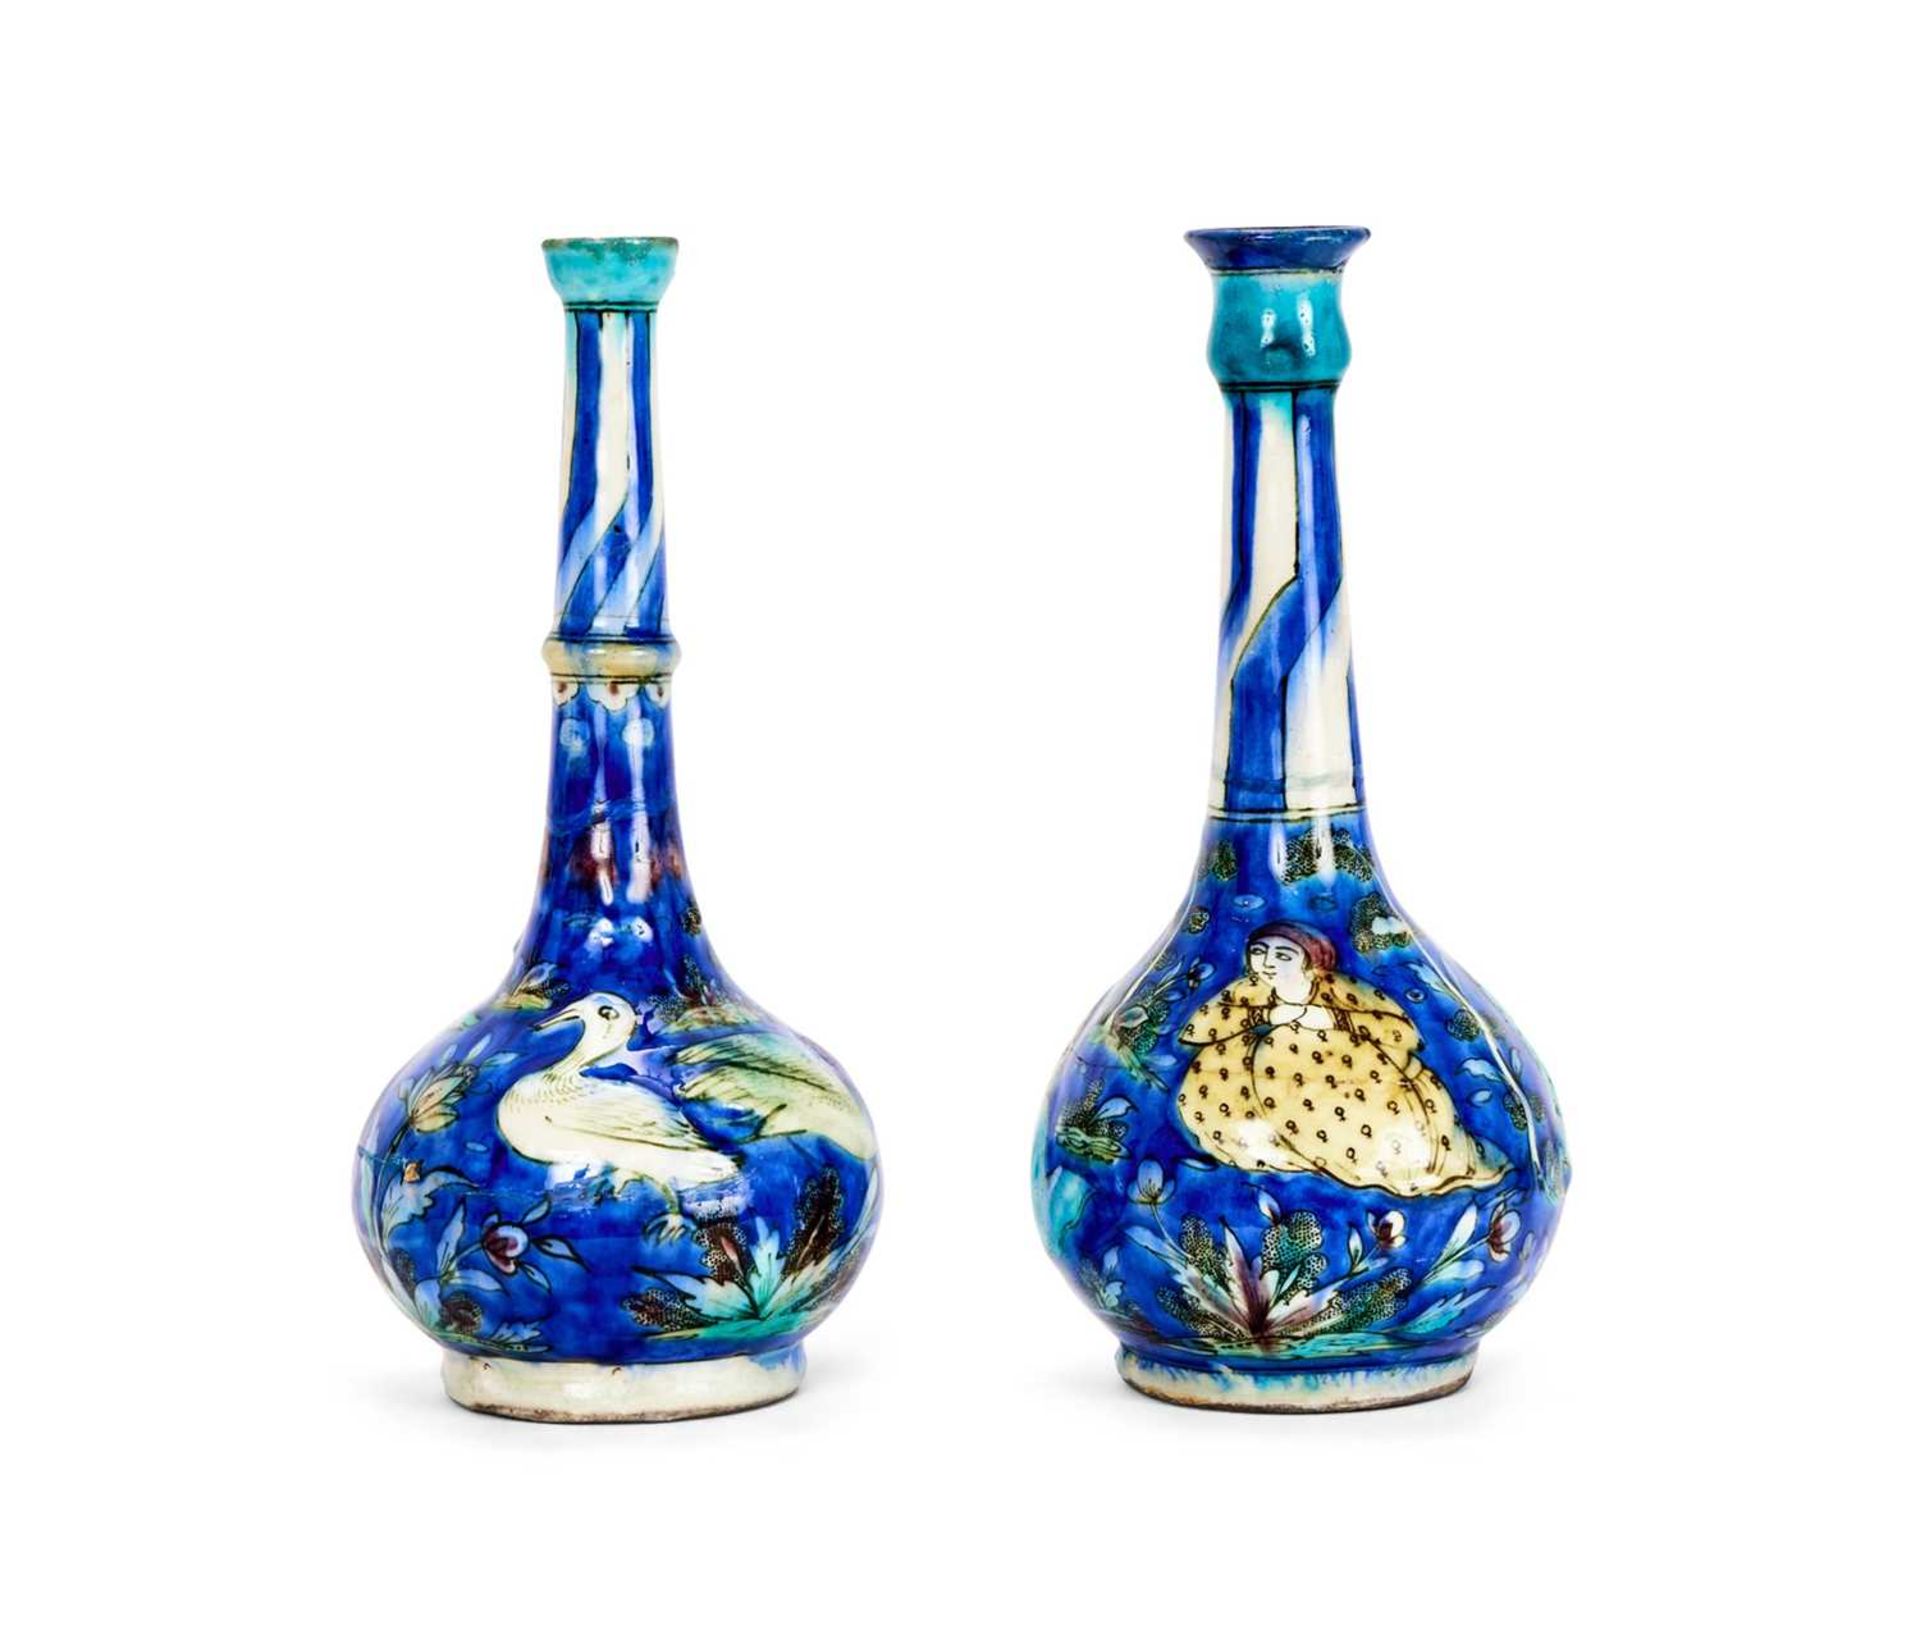 A HARLEQUIN PAIR OF 19TH CENTURY PERSIAN QAJAR BOTTLE VASES - Image 2 of 2